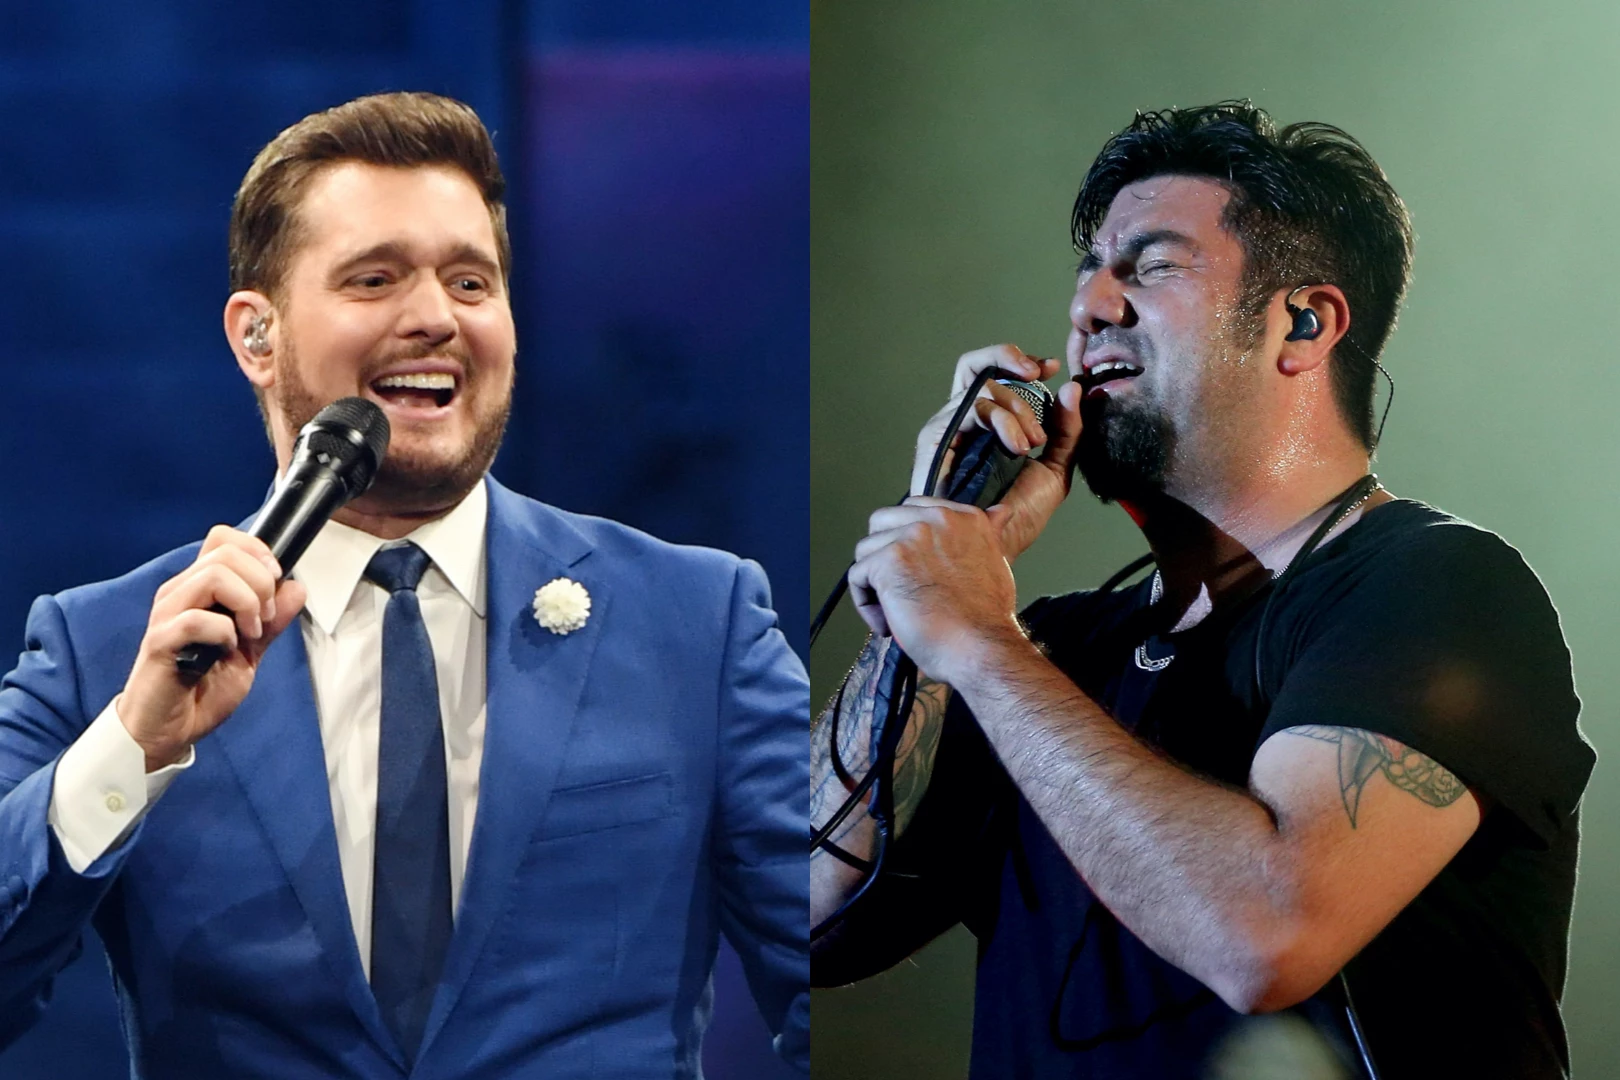 Michael Buble Is a Deftones Fan, Says He Loves Their New Album